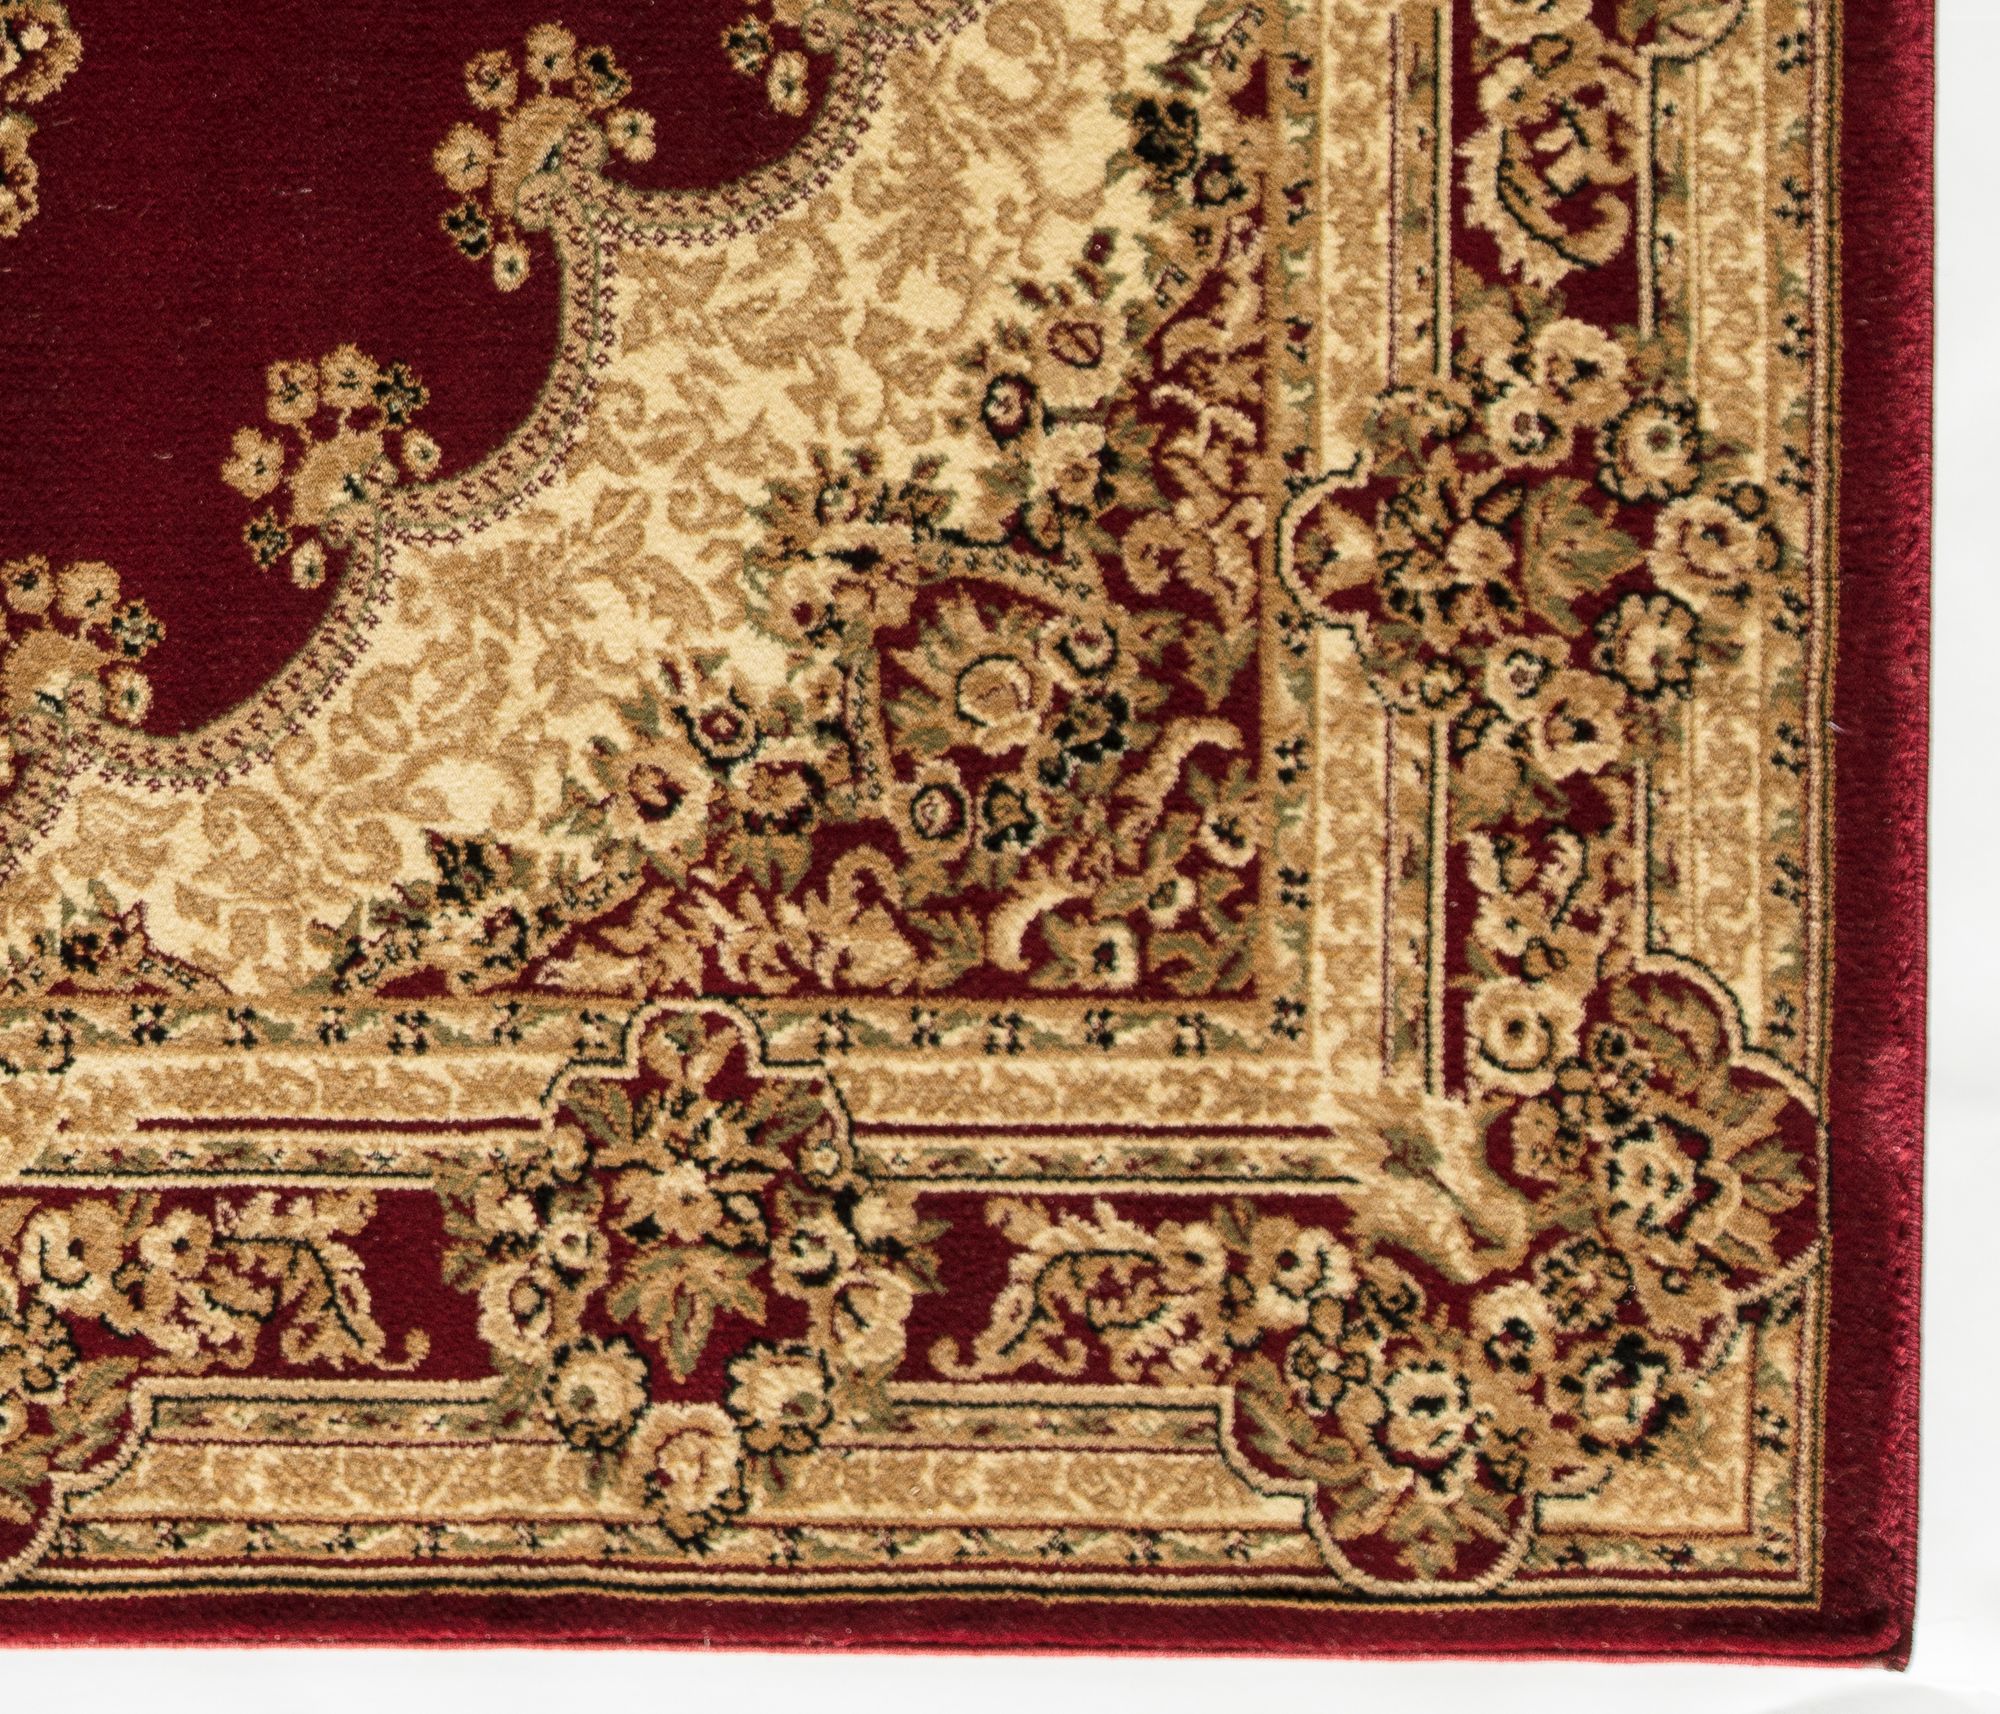 Rugs America Vista 807-RED Kerman Red Oriental Traditional Red Area Rug, 9'10"x13'2" - image 5 of 5